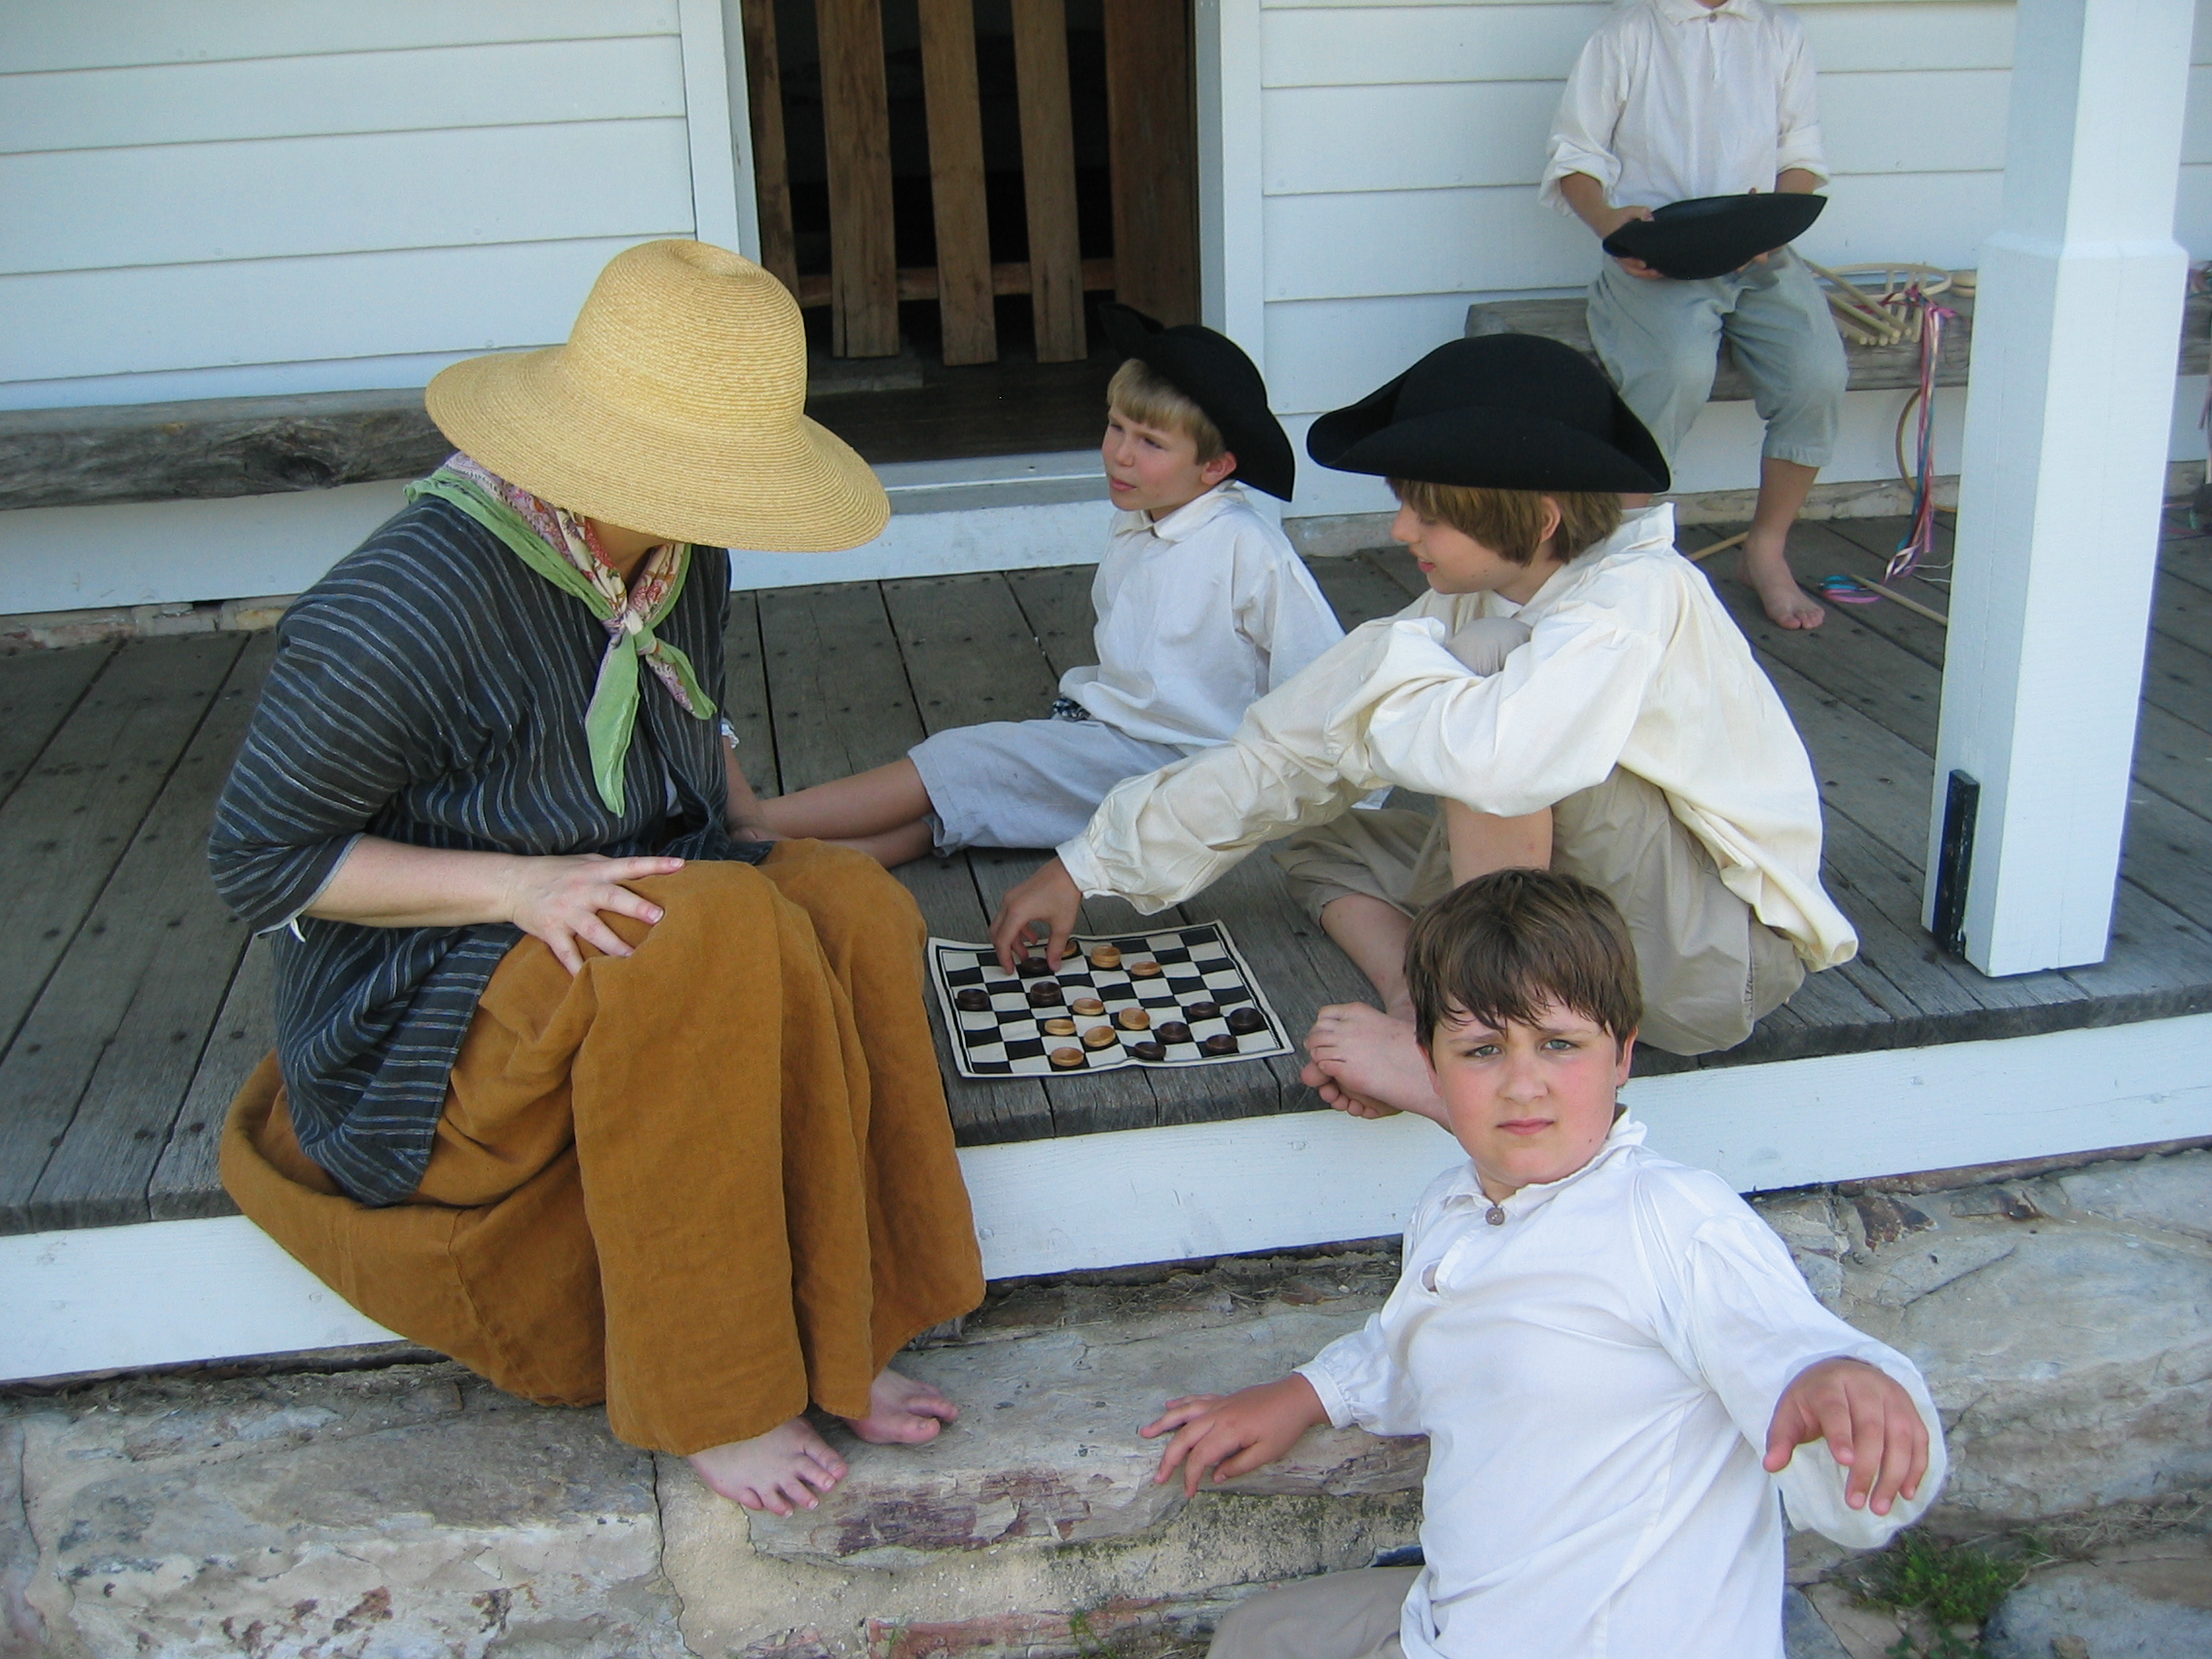 Colonial Children Playing Games